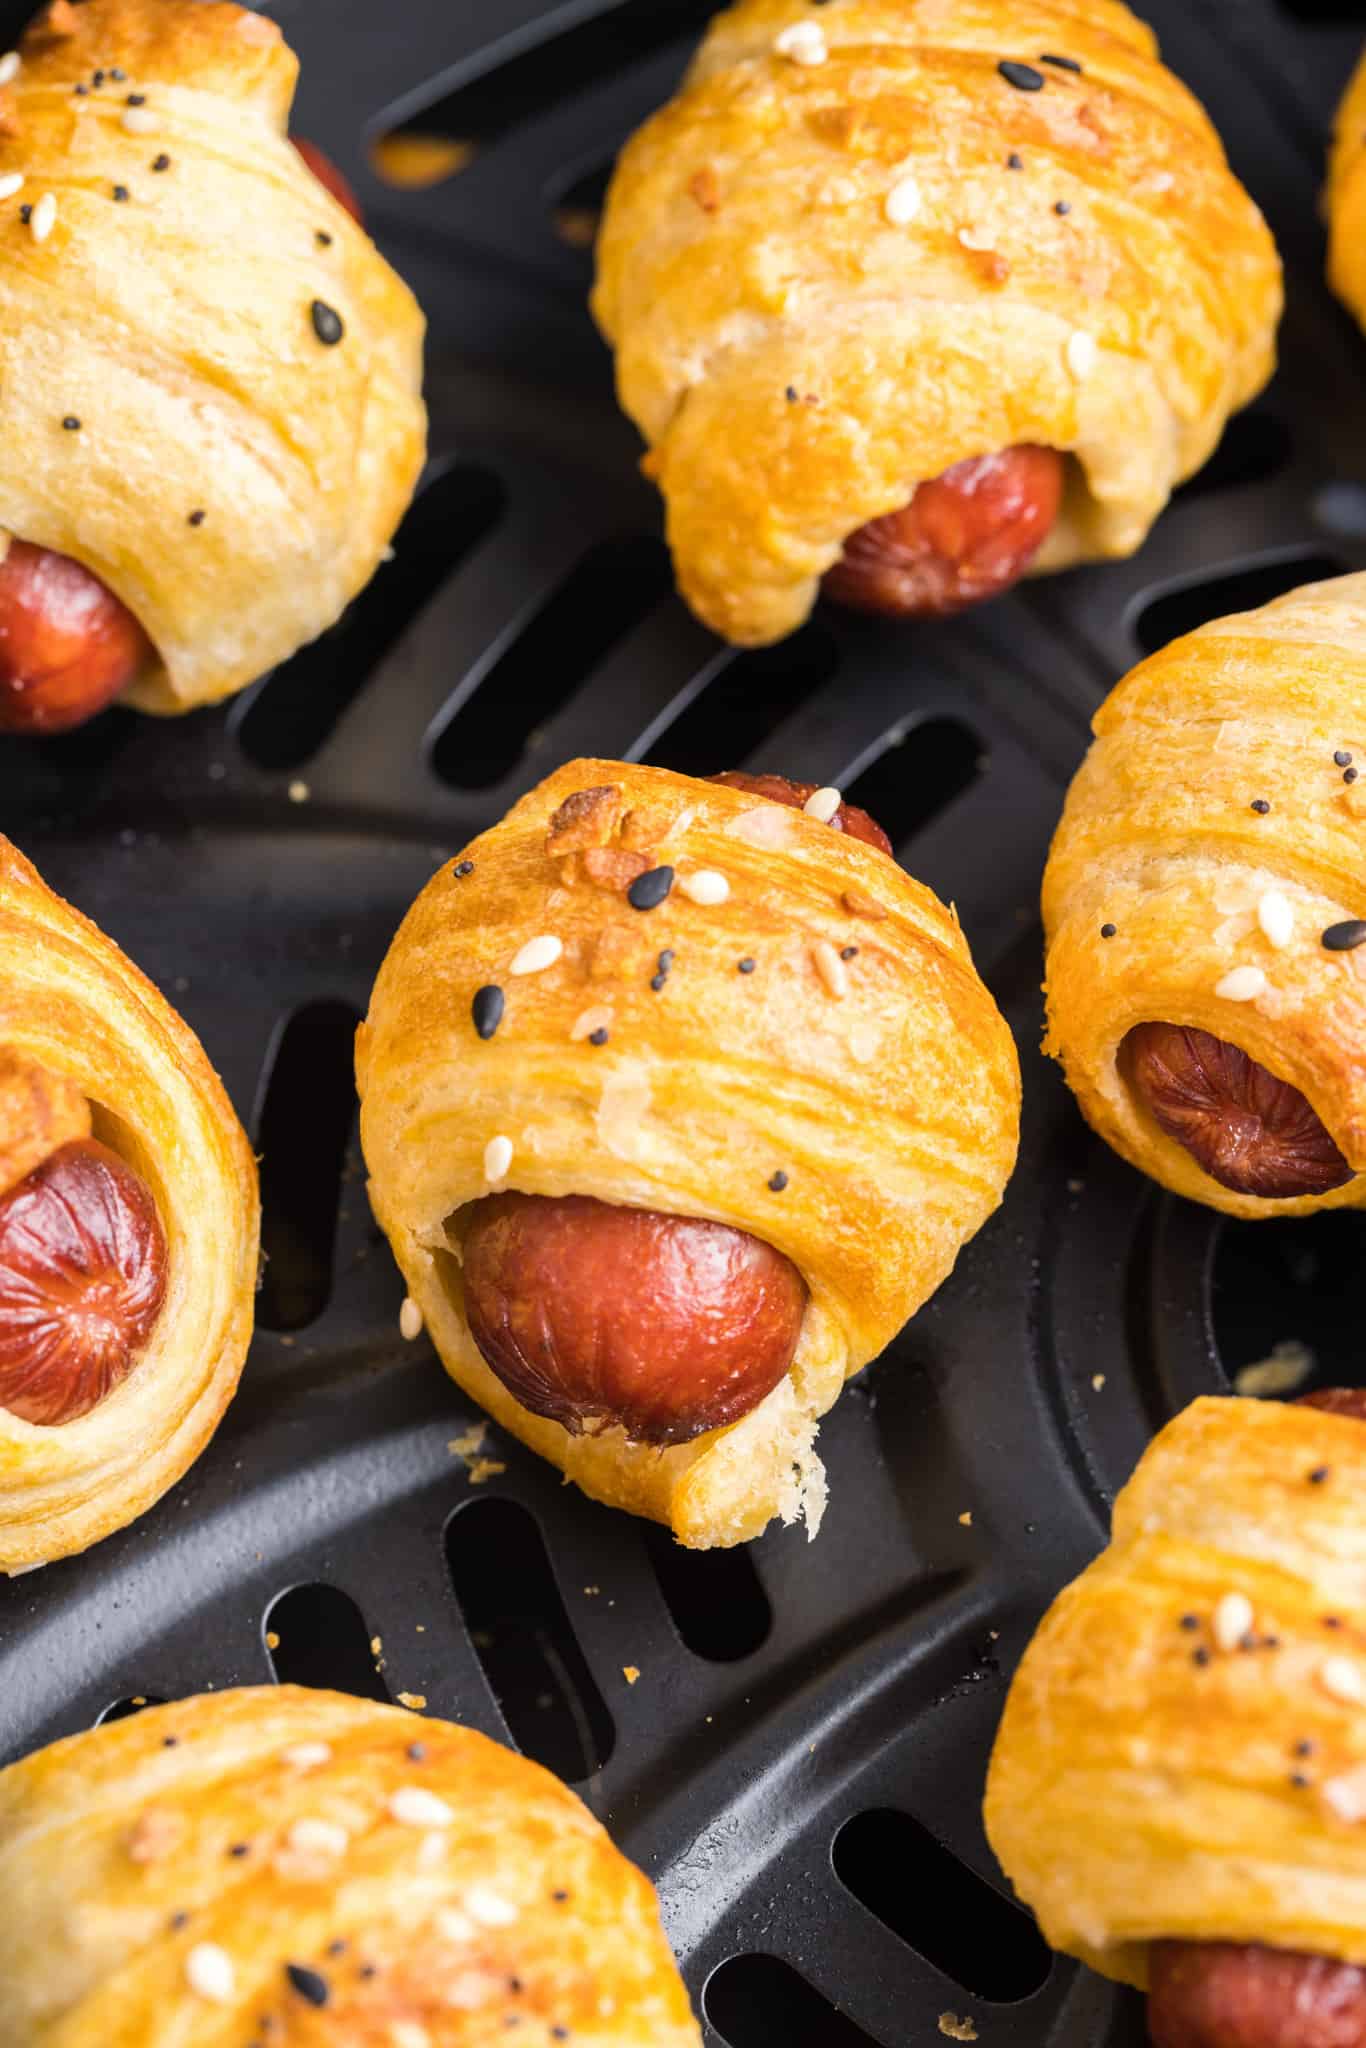 Air Fryer Pigs in a Blanket are the perfect party snack or kid friendly dinner using cocktail sausages, Pillsbury crescent dough and everything bagel seasoning.